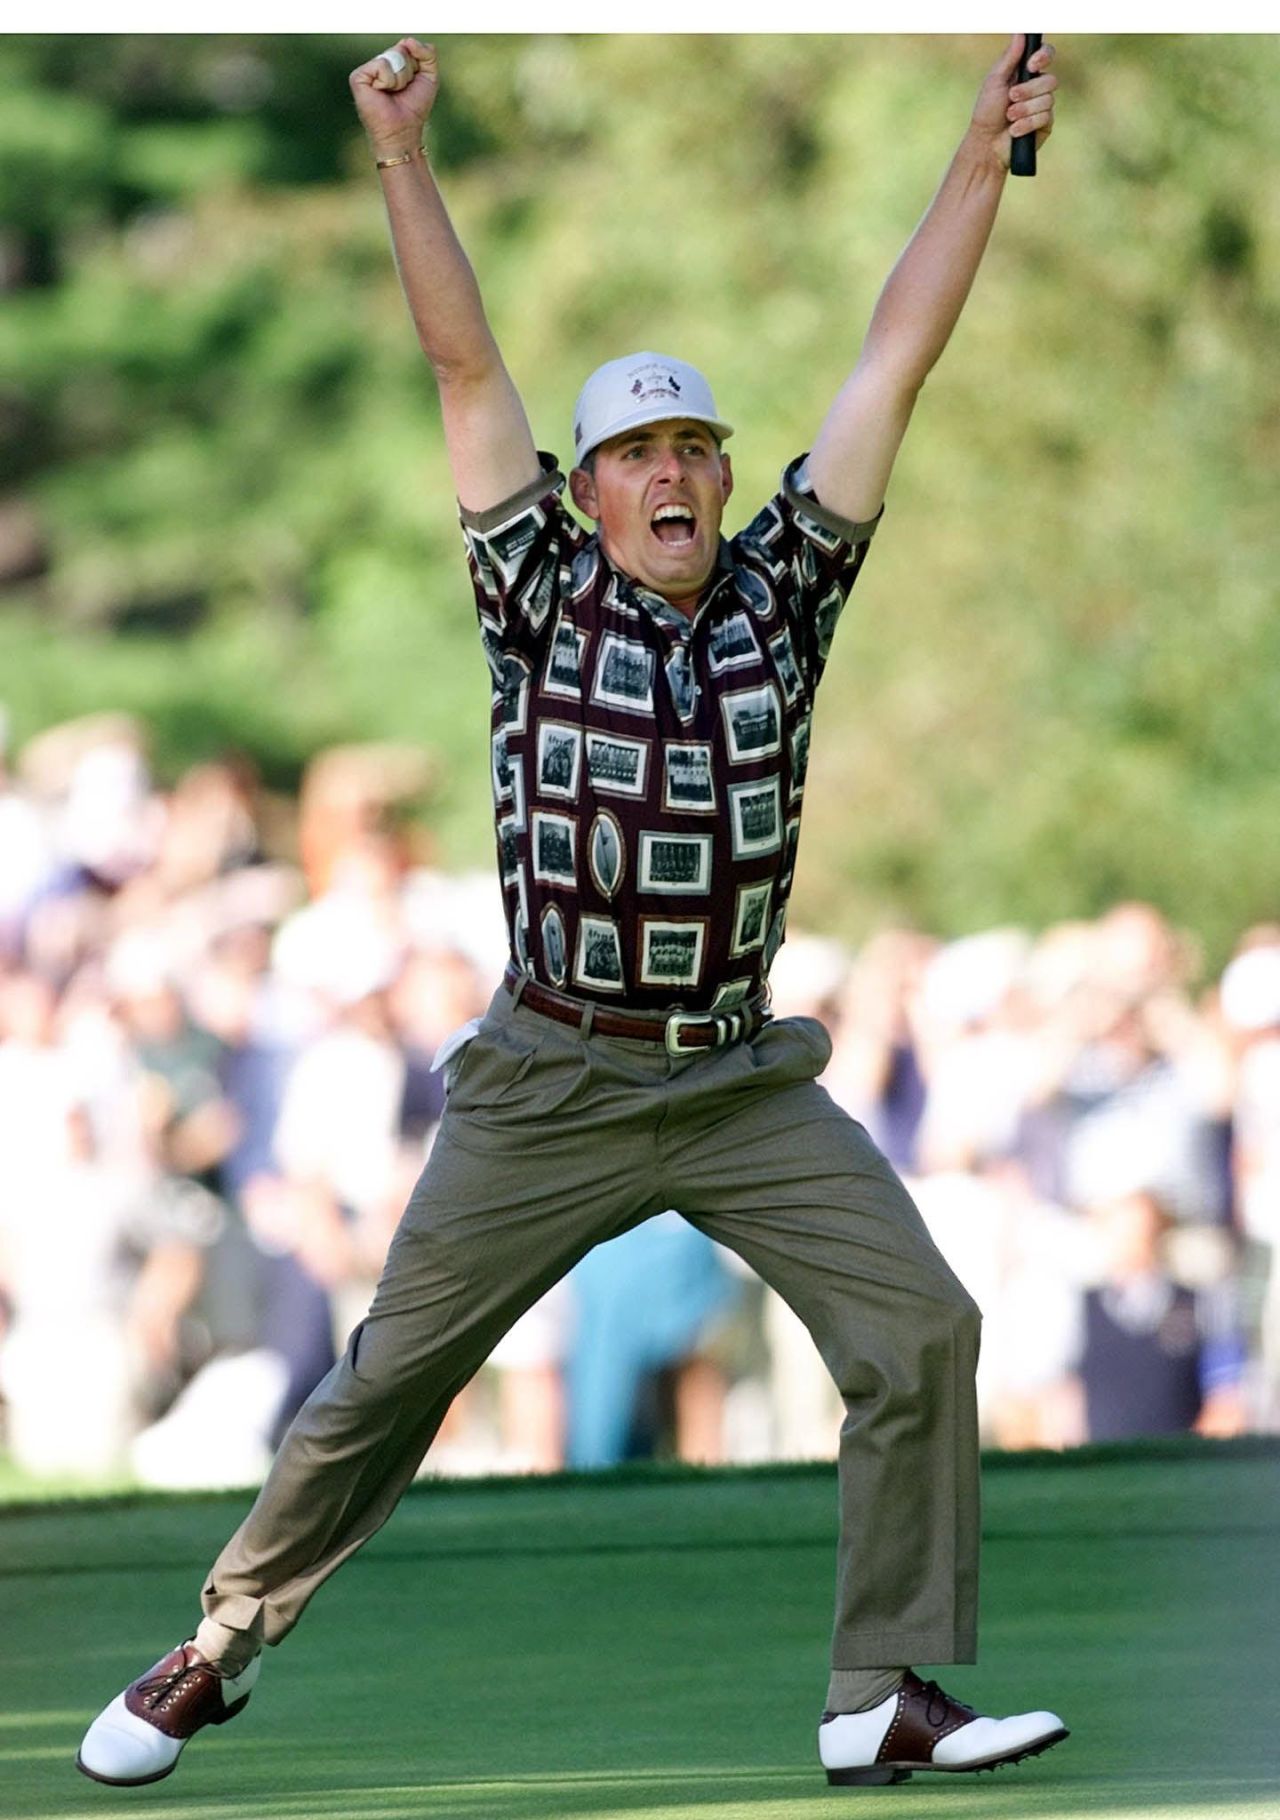 The 1999 Ryder Cup is regarded as one of the finest in the tournament's history. Justin Leonard holed a putt on the 17th, prompting an invasion from the U.S. team. Leonard's putt meant Olazabal had to find the cup to keep European hopes alive, but the Spaniard failed and the U.S. won 14 1/2 - 13 1/2.